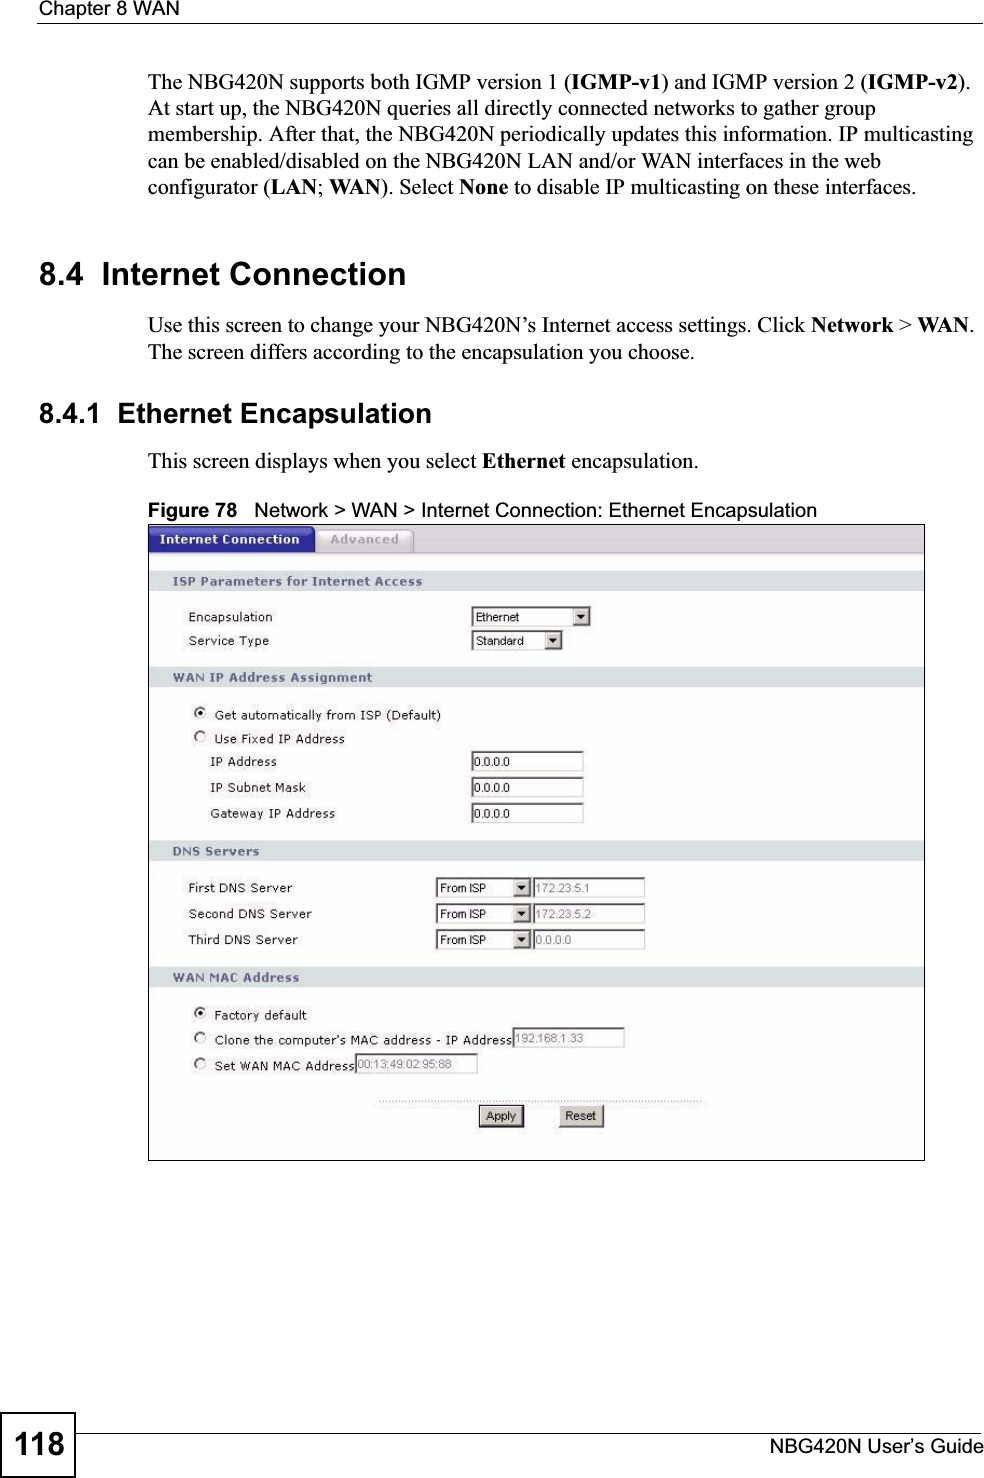 Chapter 8 WANNBG420N User’s Guide118The NBG420N supports both IGMP version 1 (IGMP-v1) and IGMP version 2 (IGMP-v2).At start up, the NBG420N queries all directly connected networks to gather group membership. After that, the NBG420N periodically updates this information. IP multicasting can be enabled/disabled on the NBG420N LAN and/or WAN interfaces in the web configurator (LAN; WAN). Select None to disable IP multicasting on these interfaces.8.4  Internet ConnectionUse this screen to change your NBG420N’s Internet access settings. Click Network &gt; WA N .The screen differs according to the encapsulation you choose.8.4.1  Ethernet EncapsulationThis screen displays when you select Ethernet encapsulation.Figure 78   Network &gt; WAN &gt; Internet Connection: Ethernet Encapsulation